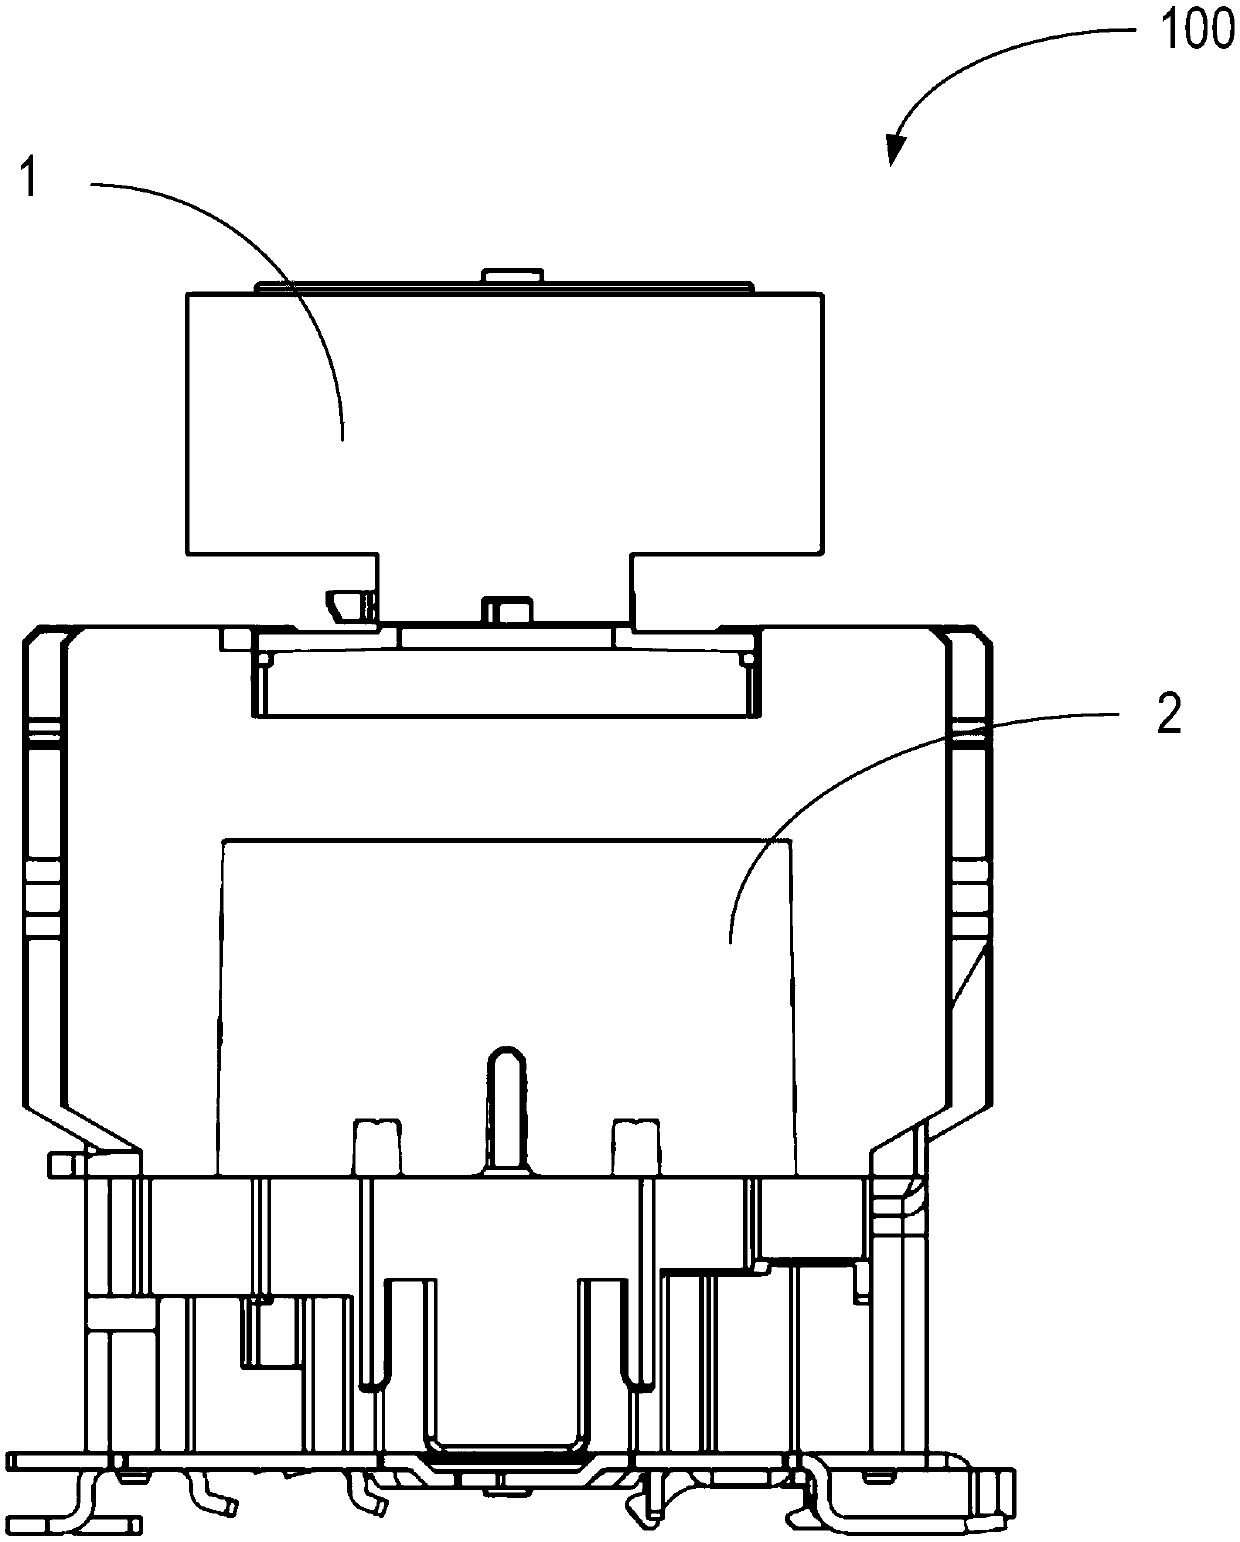 Wiring module for use in conjunction with contactor and contactor assembly